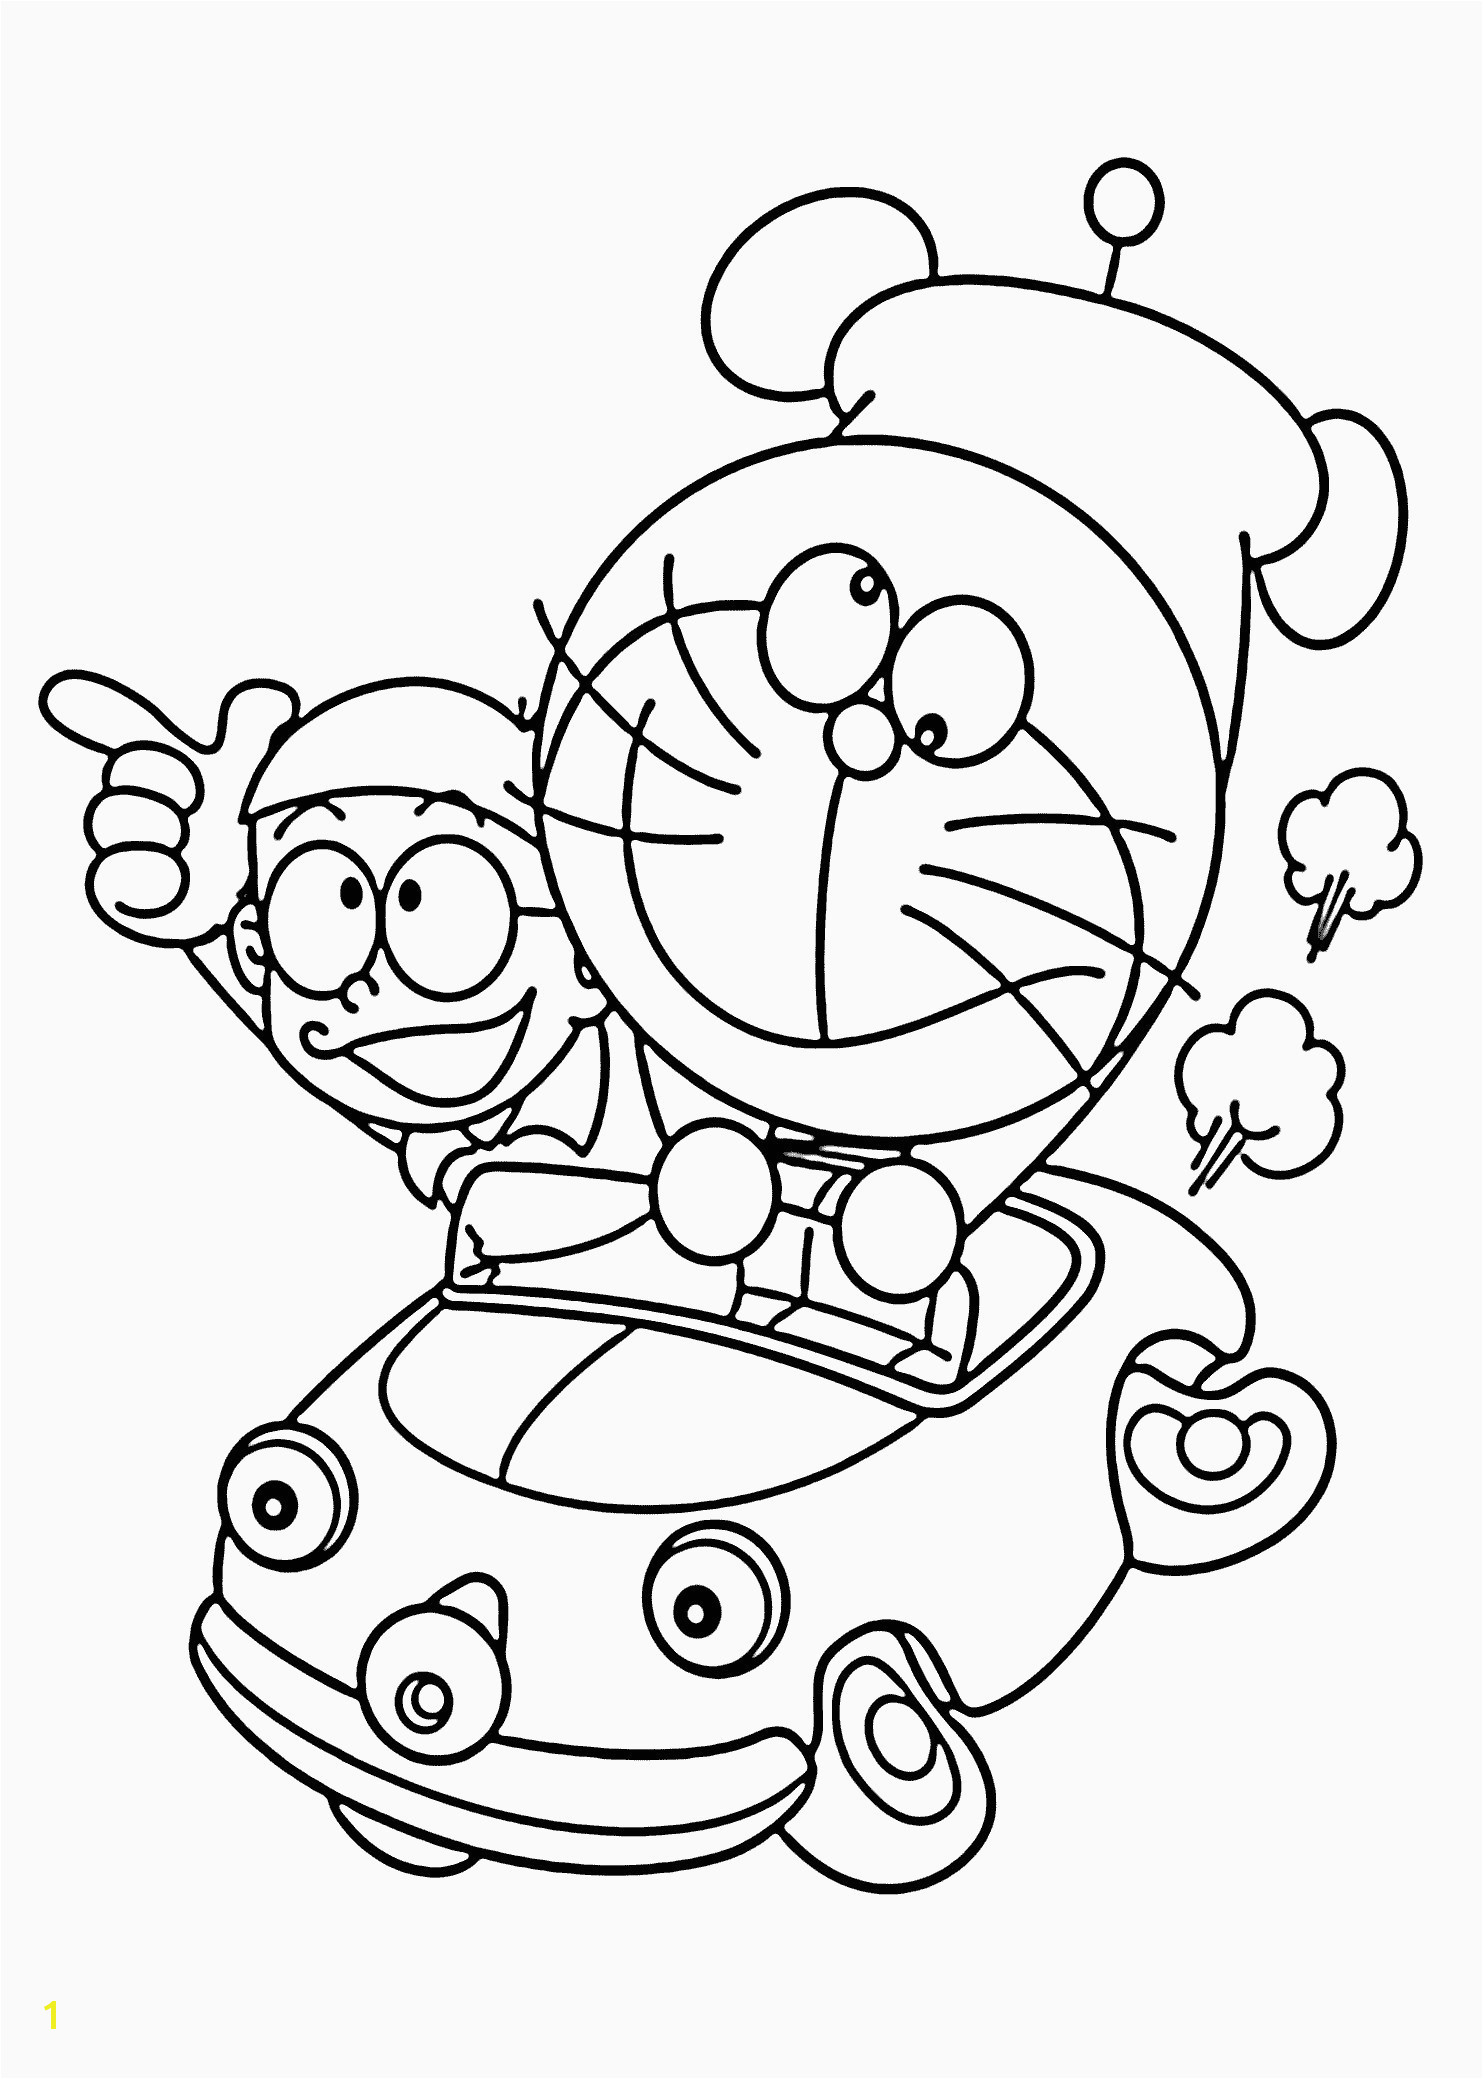 Coloring Pages Of African American Heroes Cuties Coloring Pages Gallery thephotosync